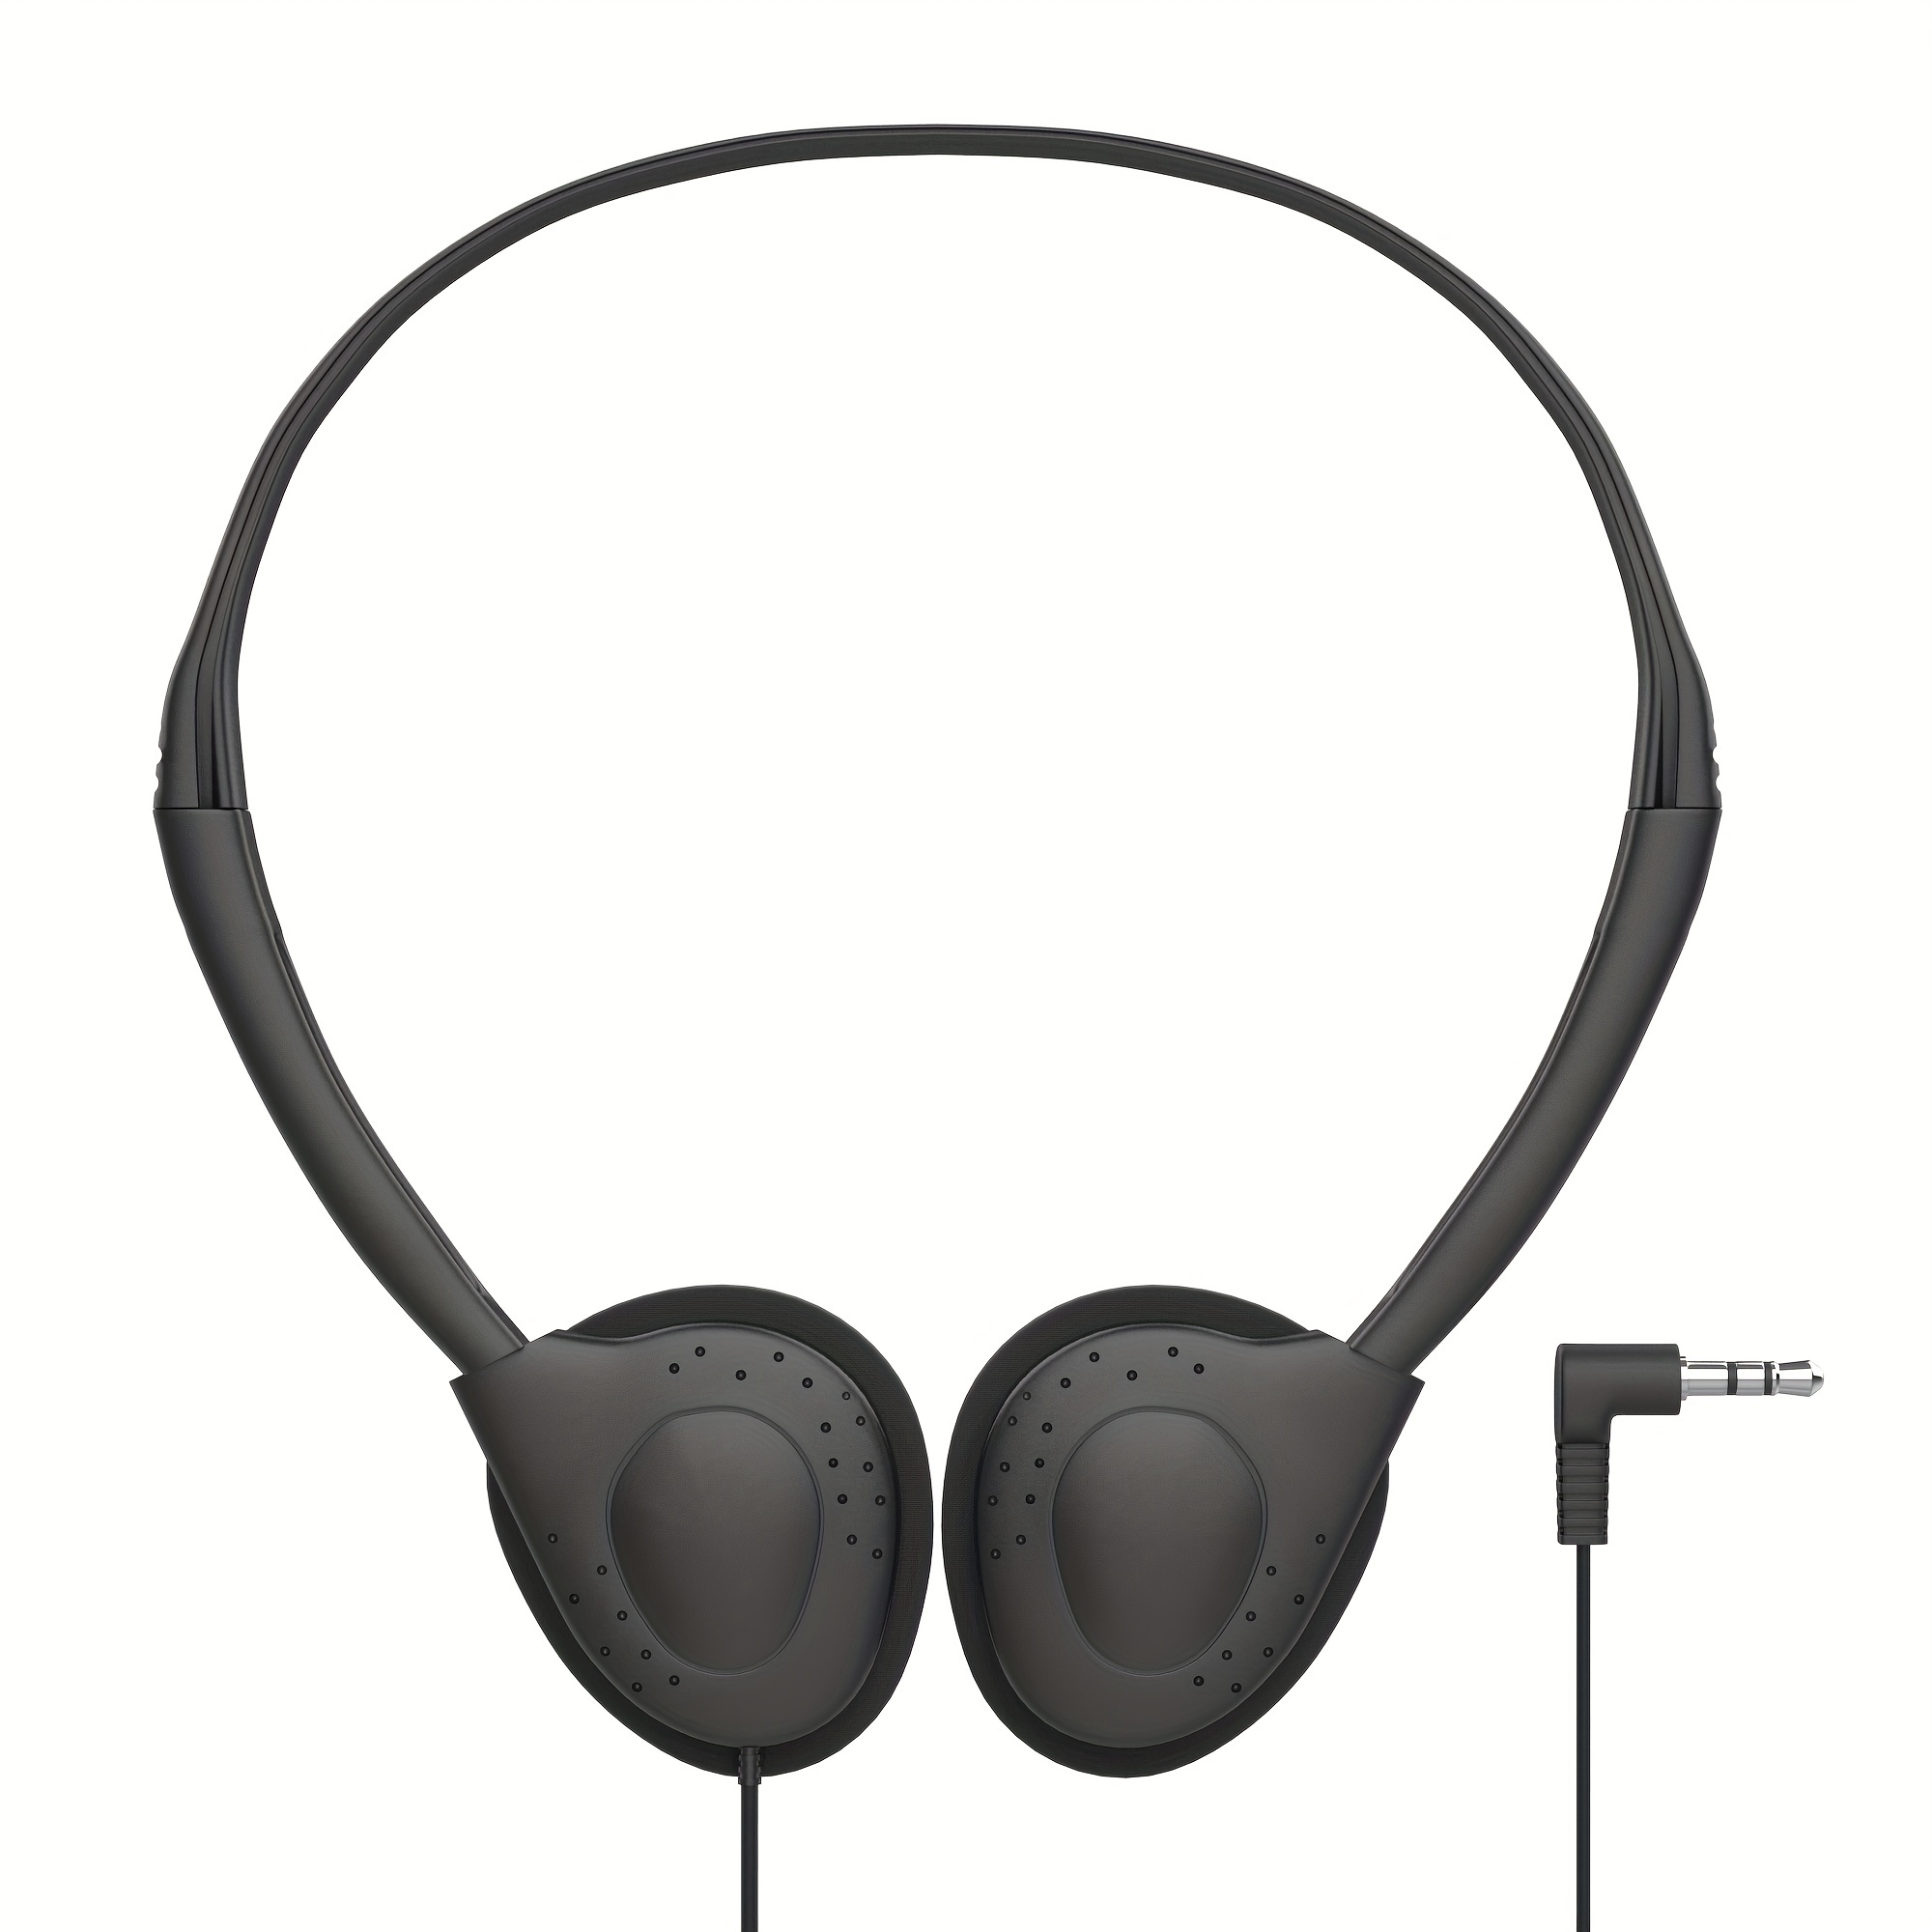 

Classic Headphones Without Microphone, 3.5mm Round Hole Interface For Mobile Phones, Computers, And Game Consoles To Play Games